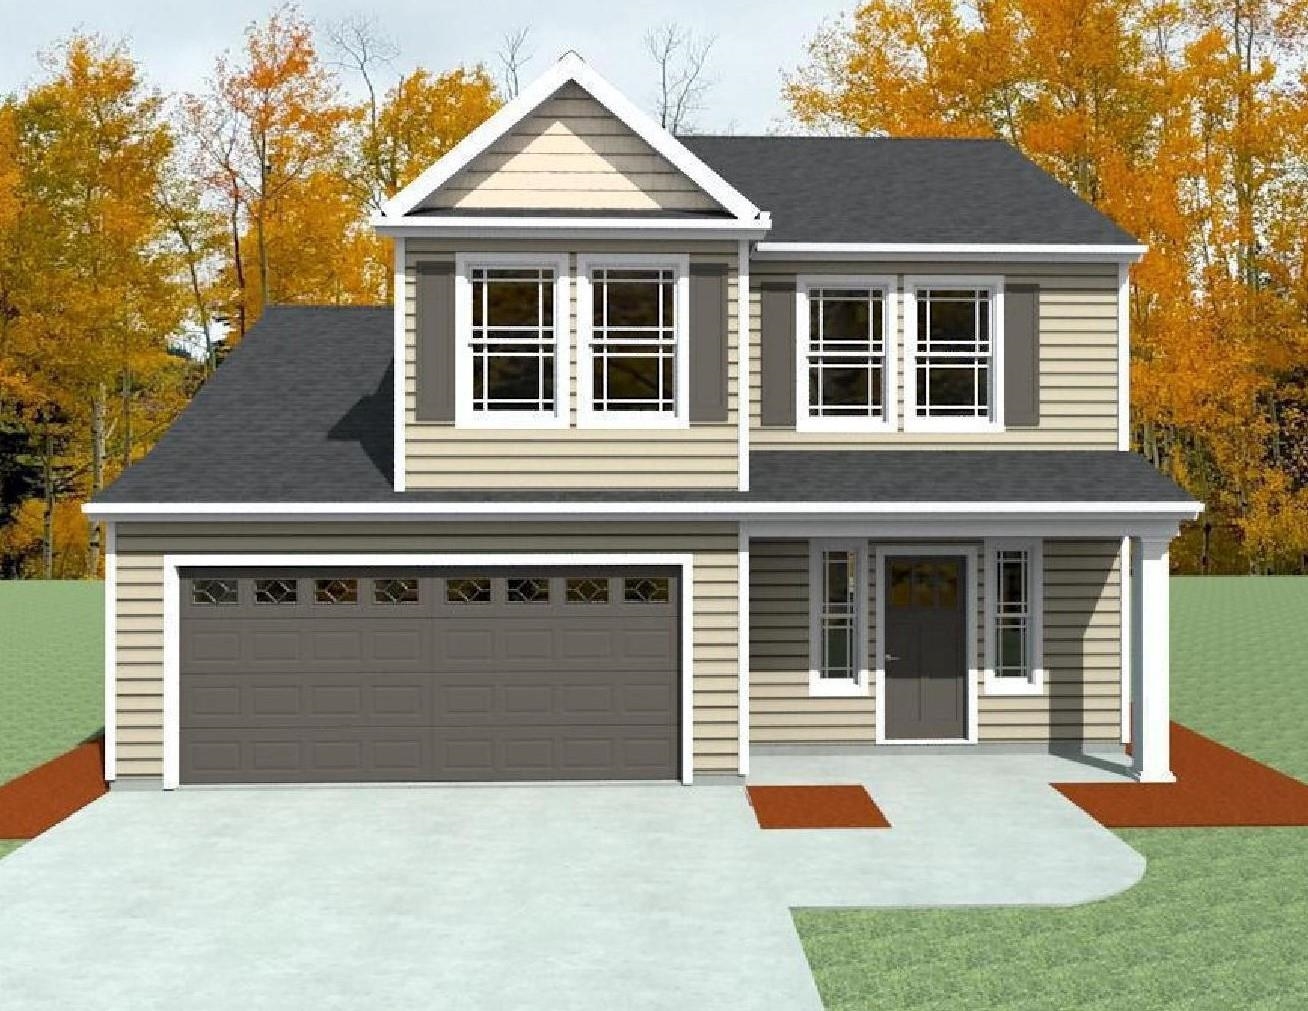 This is the REYNOLDS floorplan. Construction beginning soon on this 2 story home featuring 3 bedrooms, 2 1/2 bathrooms, gas fireplace, and 12x12 back patio. Located in the NEW Elliott park community in Lyman just minutes from Spartanburg and Greenville. Call today for more info!